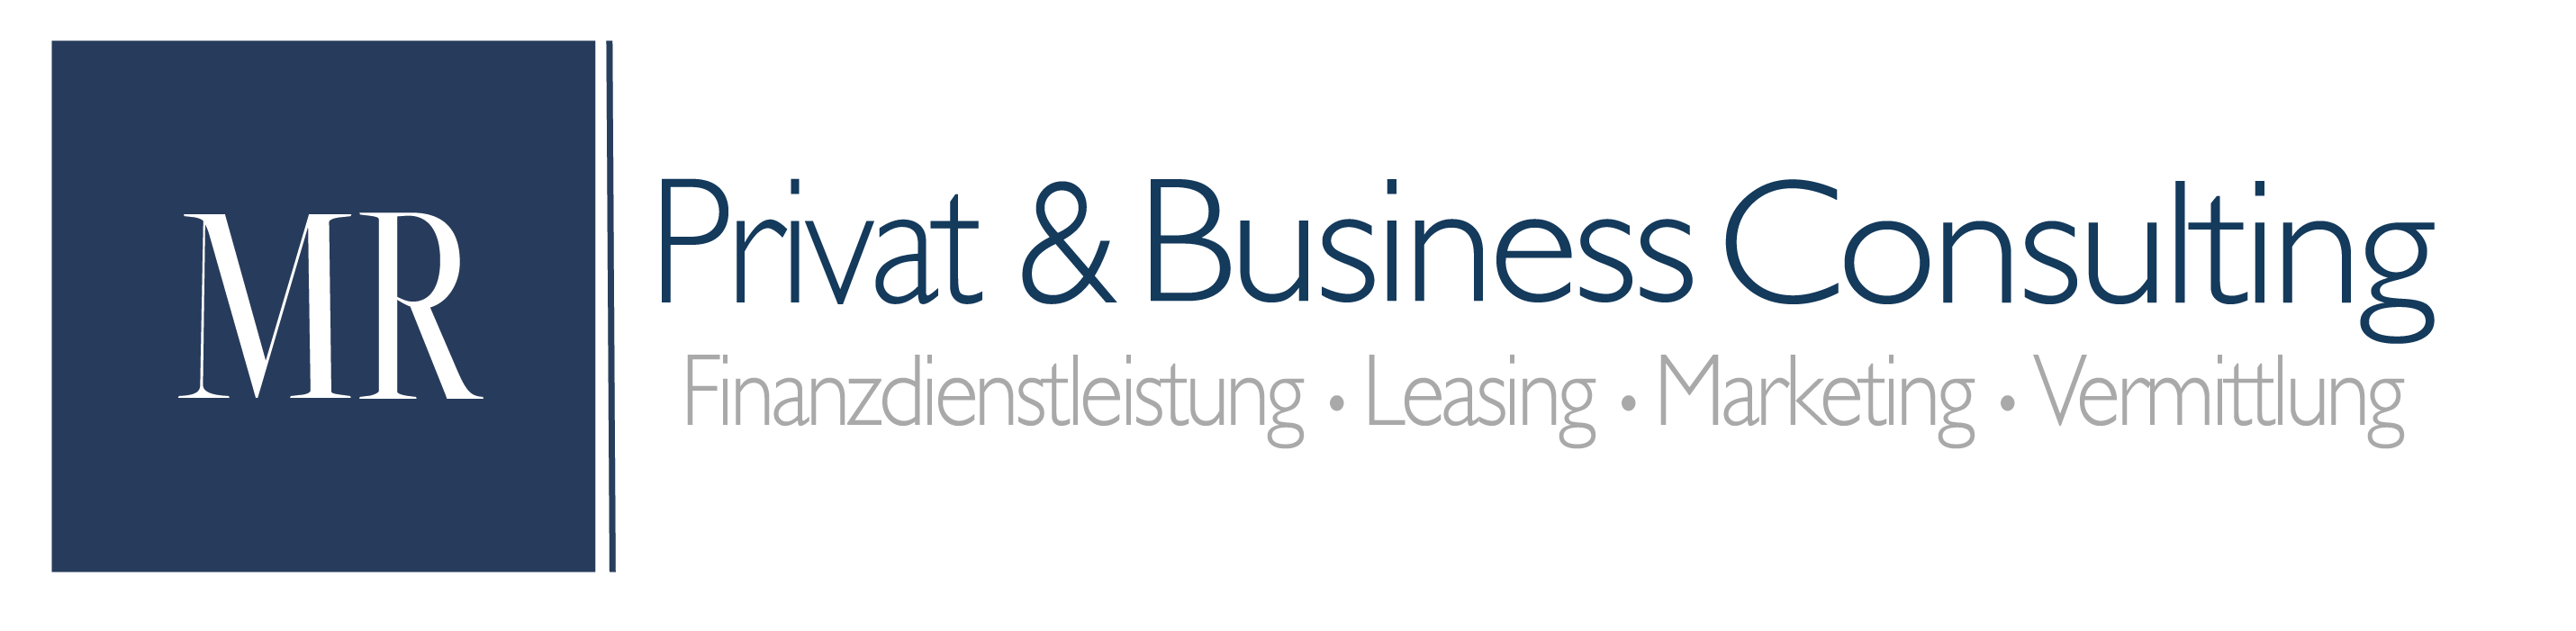 MR Privat & Business Consulting  Logo